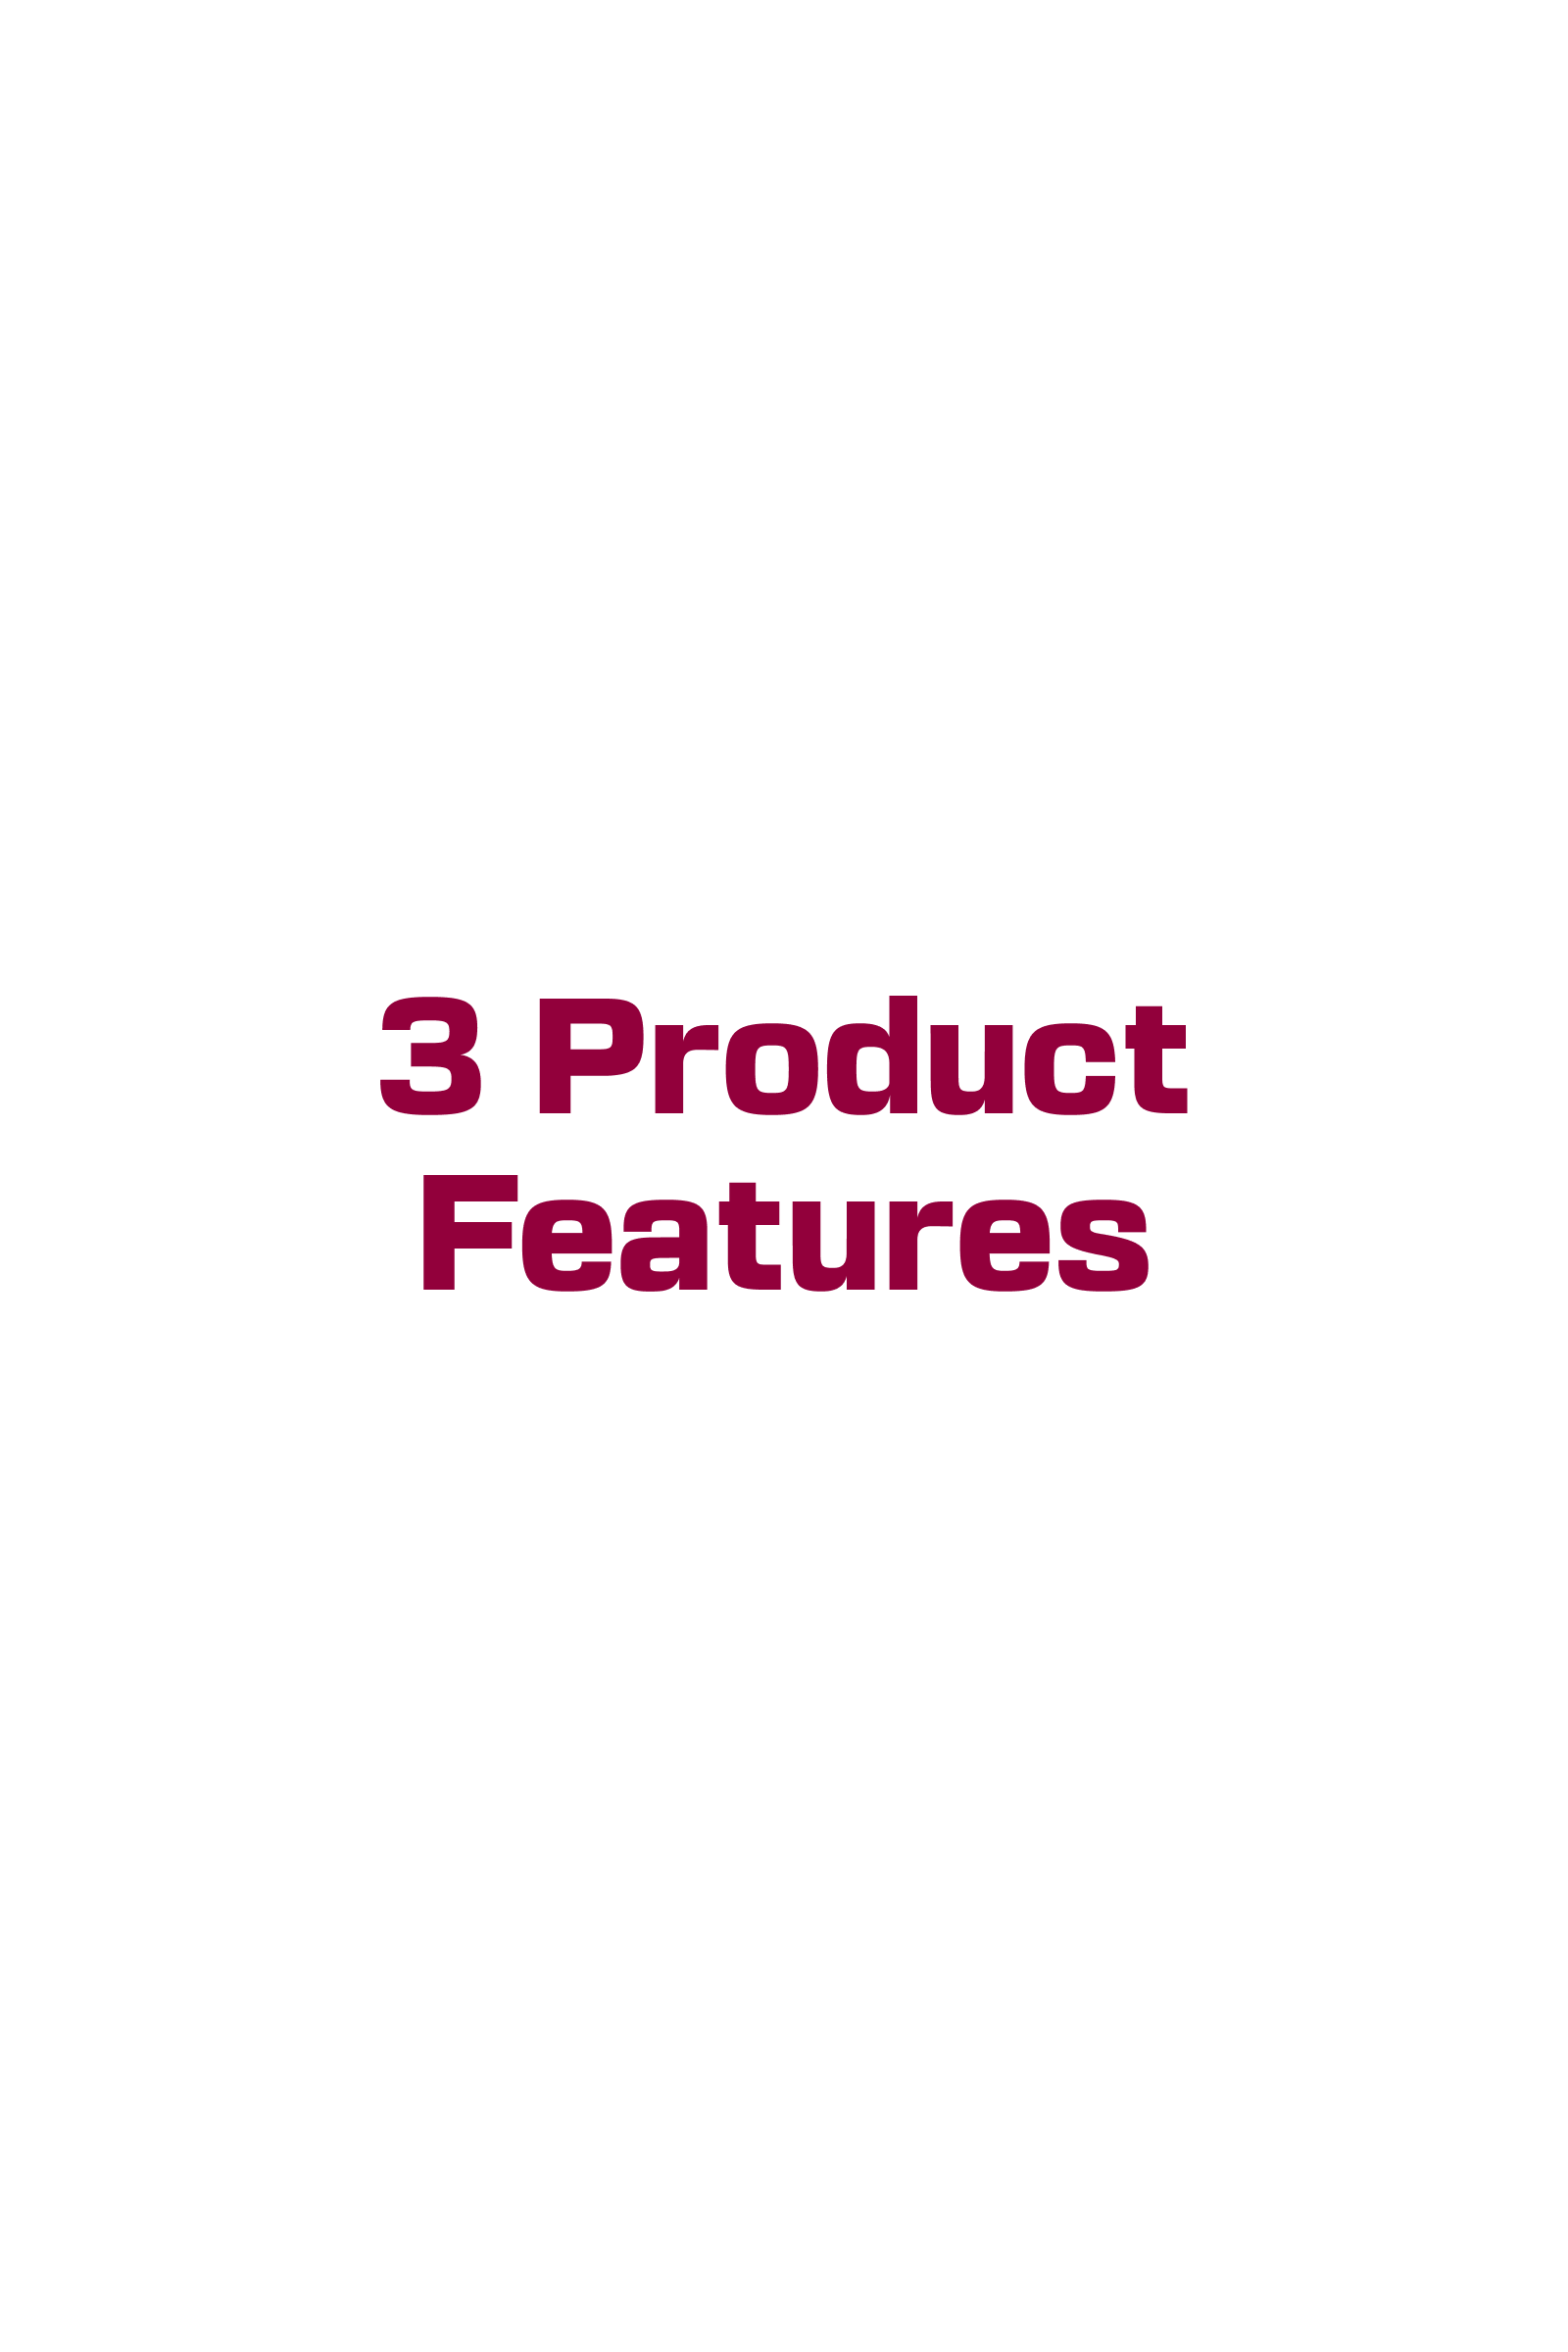 3 product features